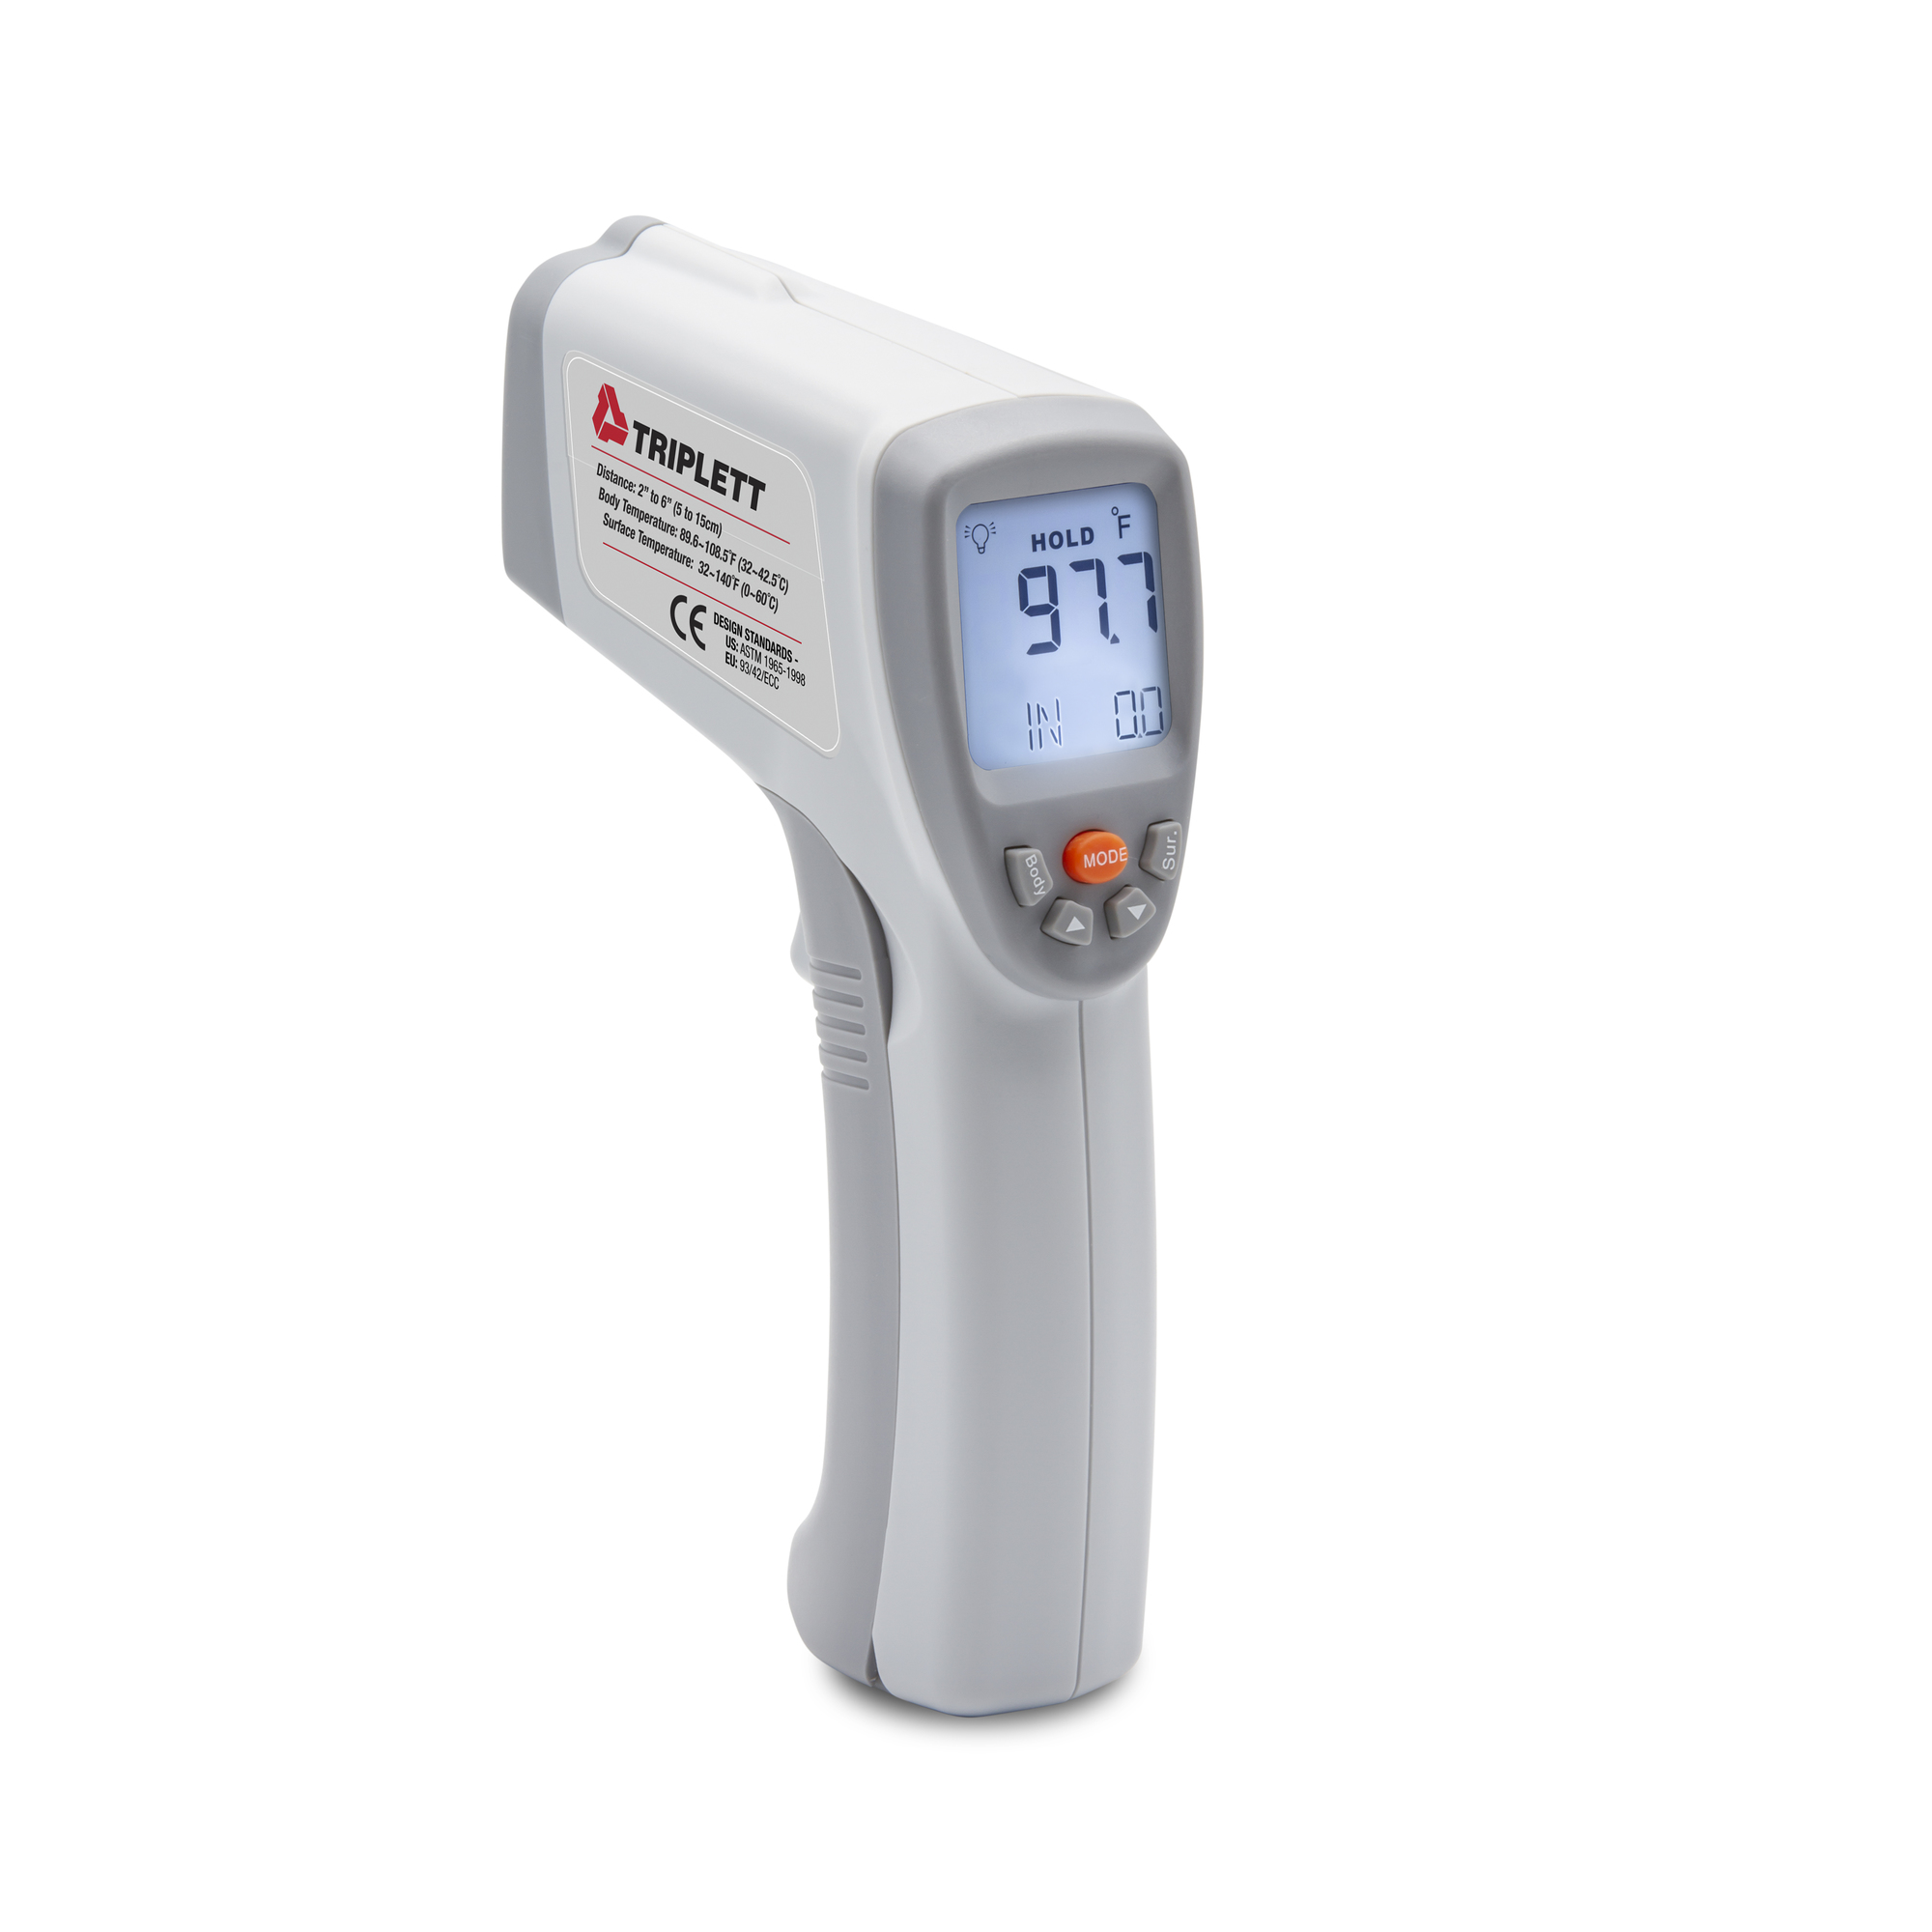 Triplett, Non-Contact Forehead IR Thermometer, Model FT2020